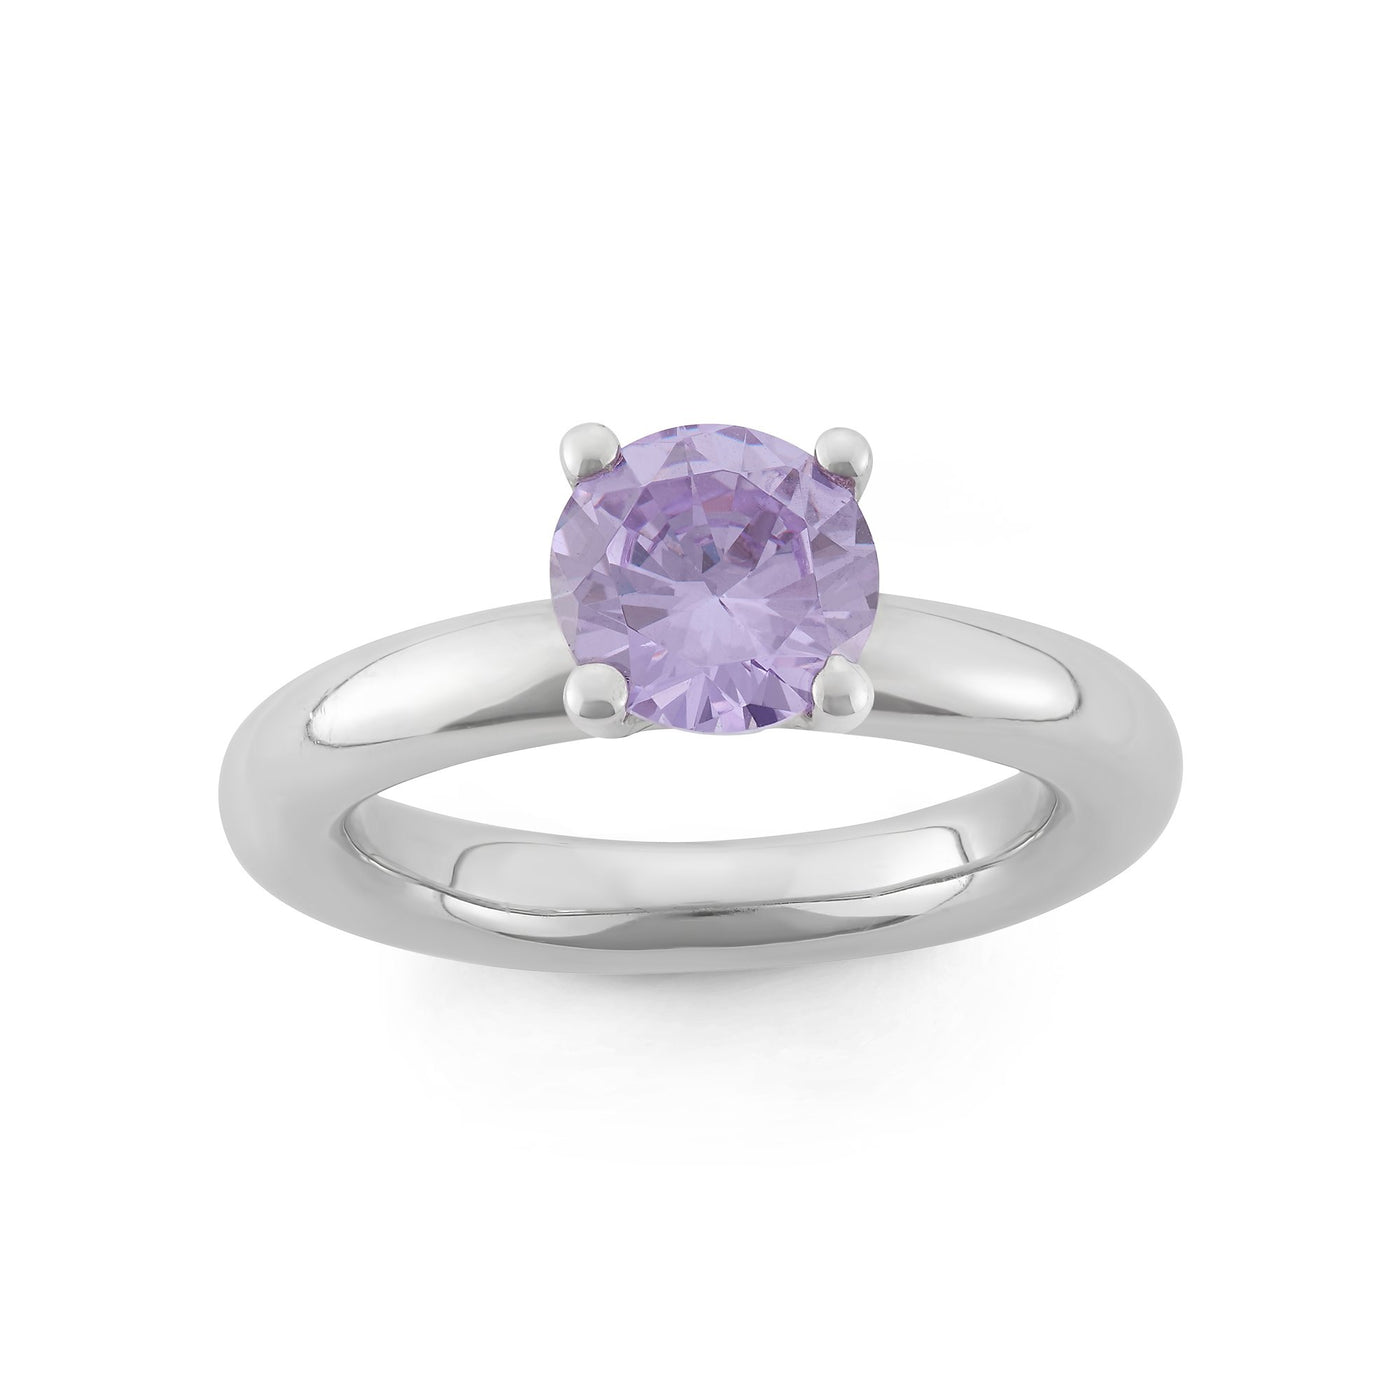 Sterling Silver Spinning Ring With Faceted Violet Round CZ Center Stone